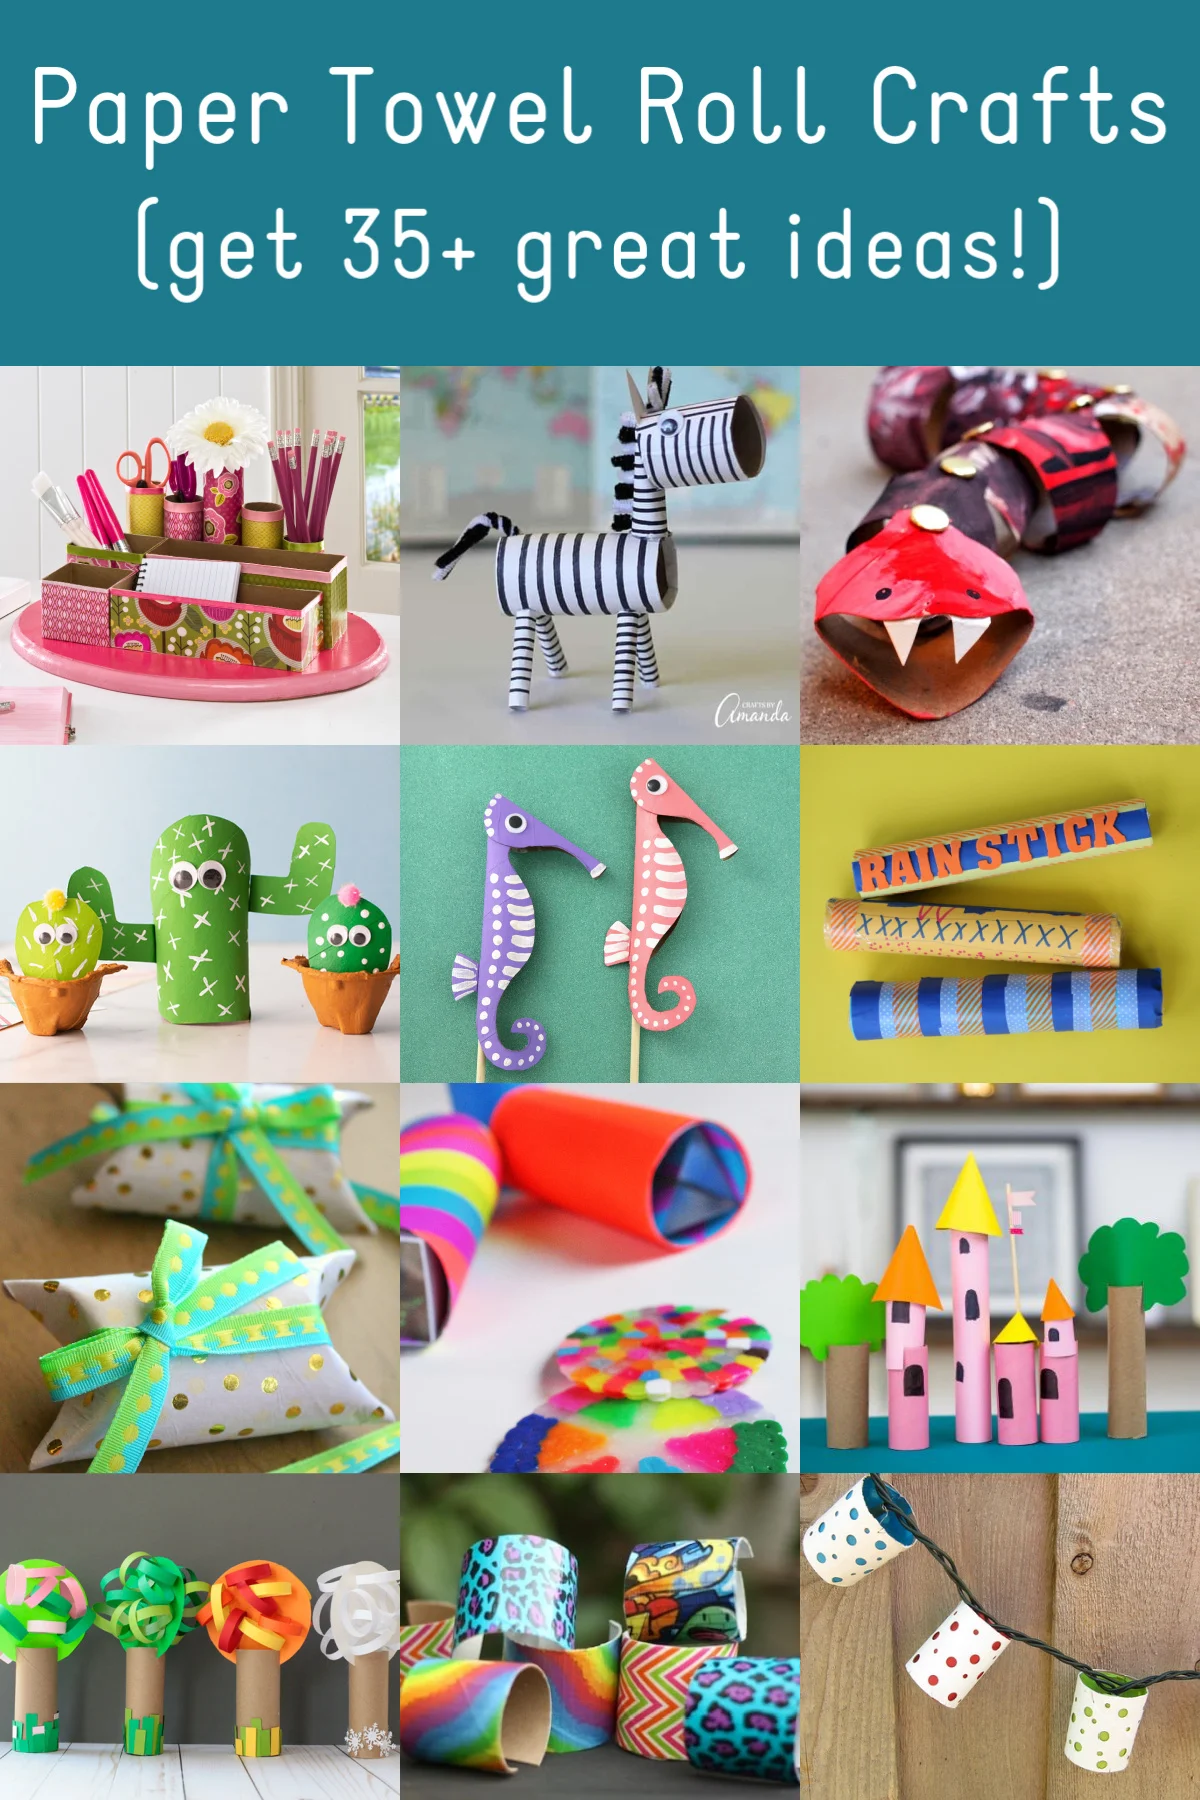 8 Simple Ideas for Kids Crafts Organization - Life Should Cost Less